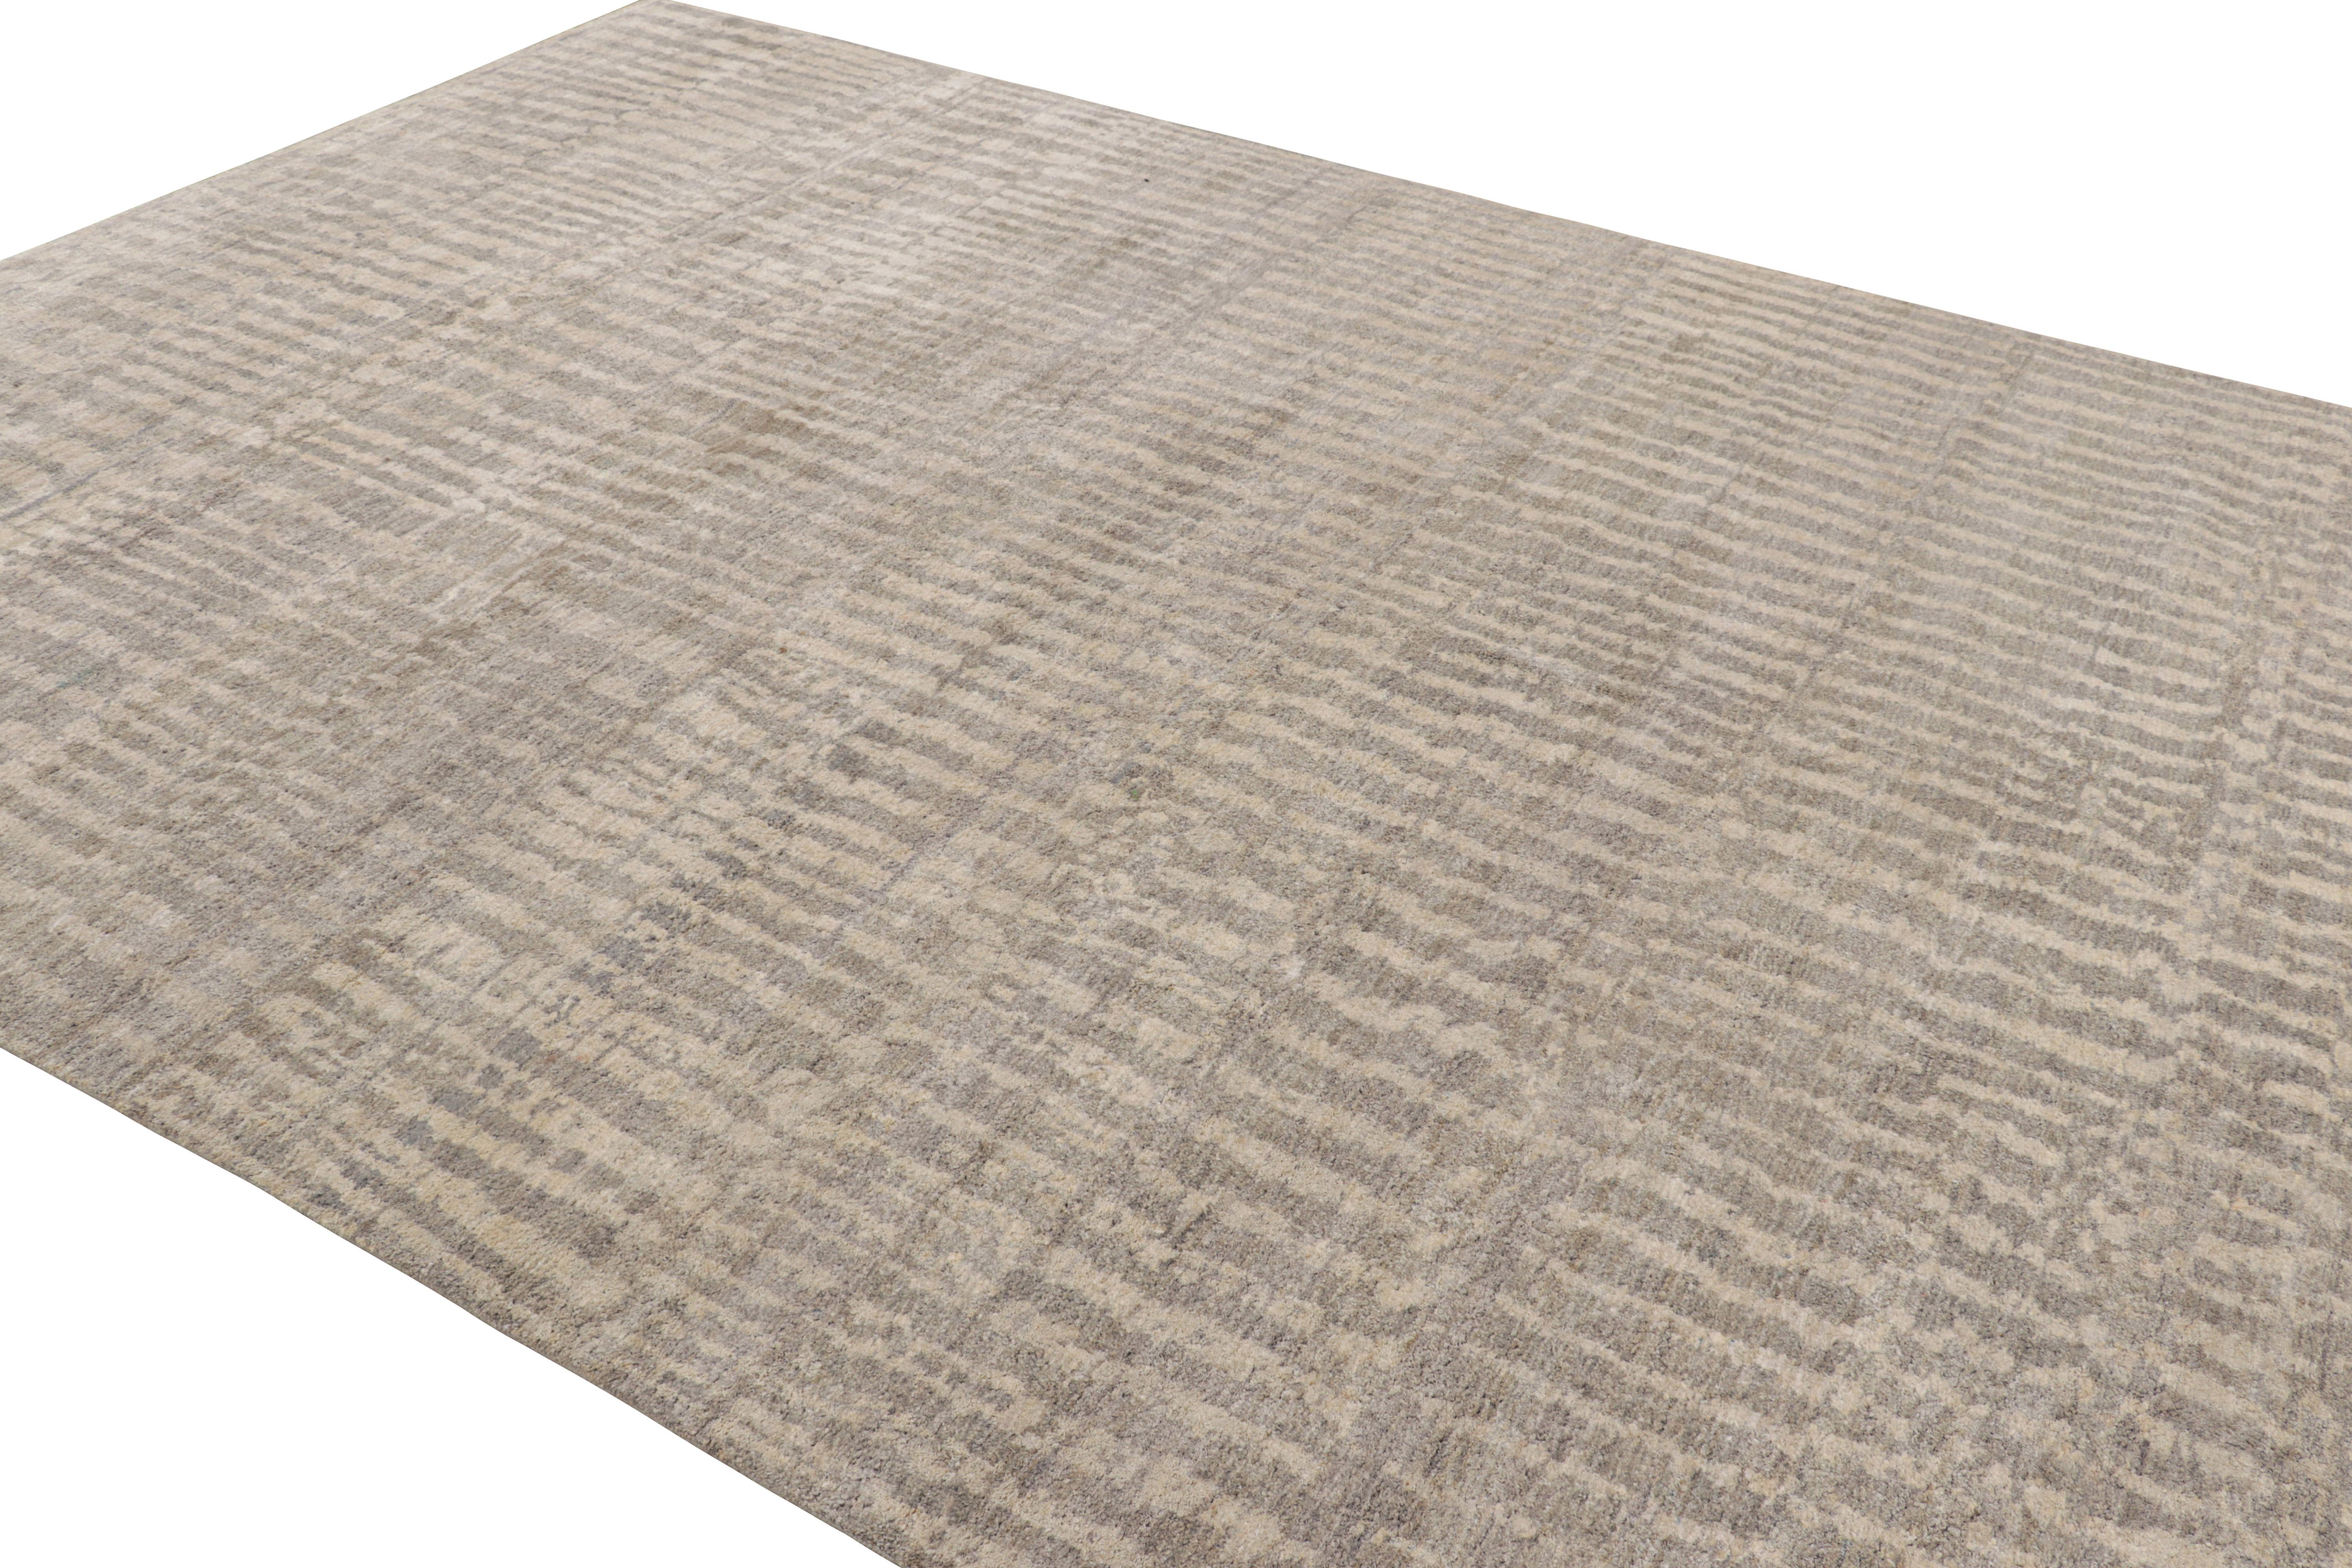 Indian Rug & Kilim’s Contemporary Textural Rug in Gray and Cream Tones For Sale